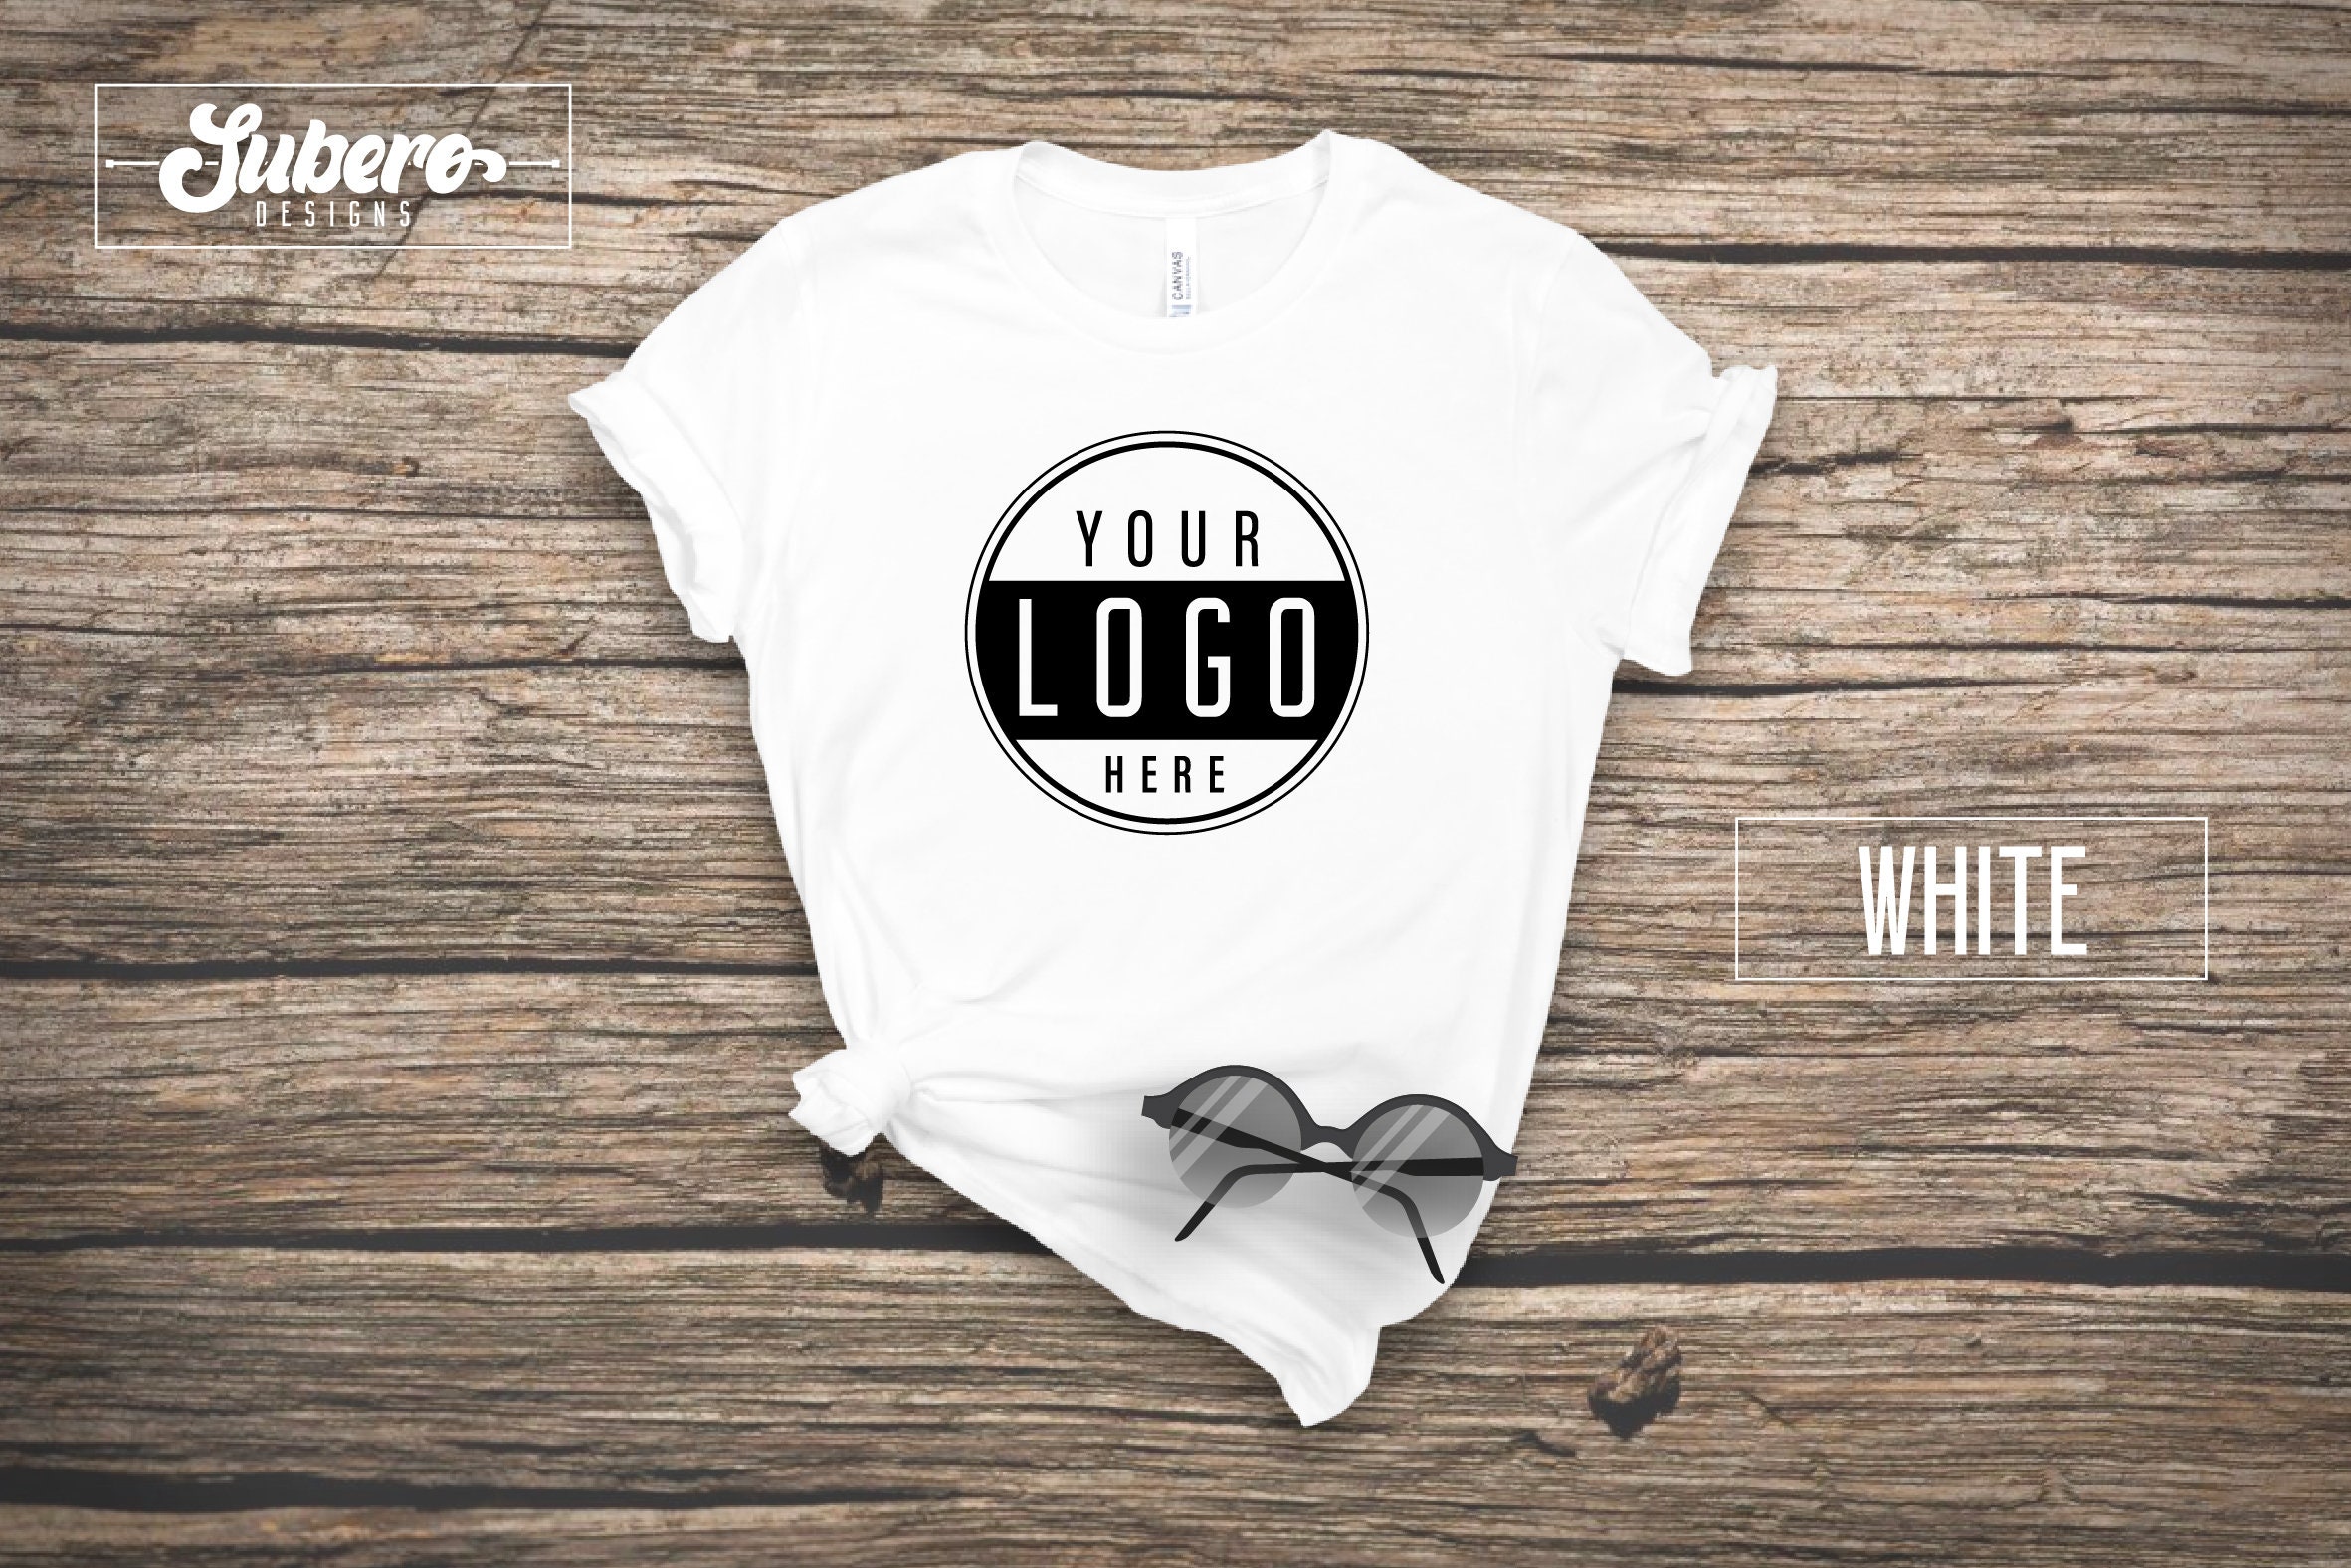 Discover Custom Shirt, Your Logo Shirt, Customize your Own Shirt with Text, Custom made shirt, Personalized T-Shirt, Custom Text